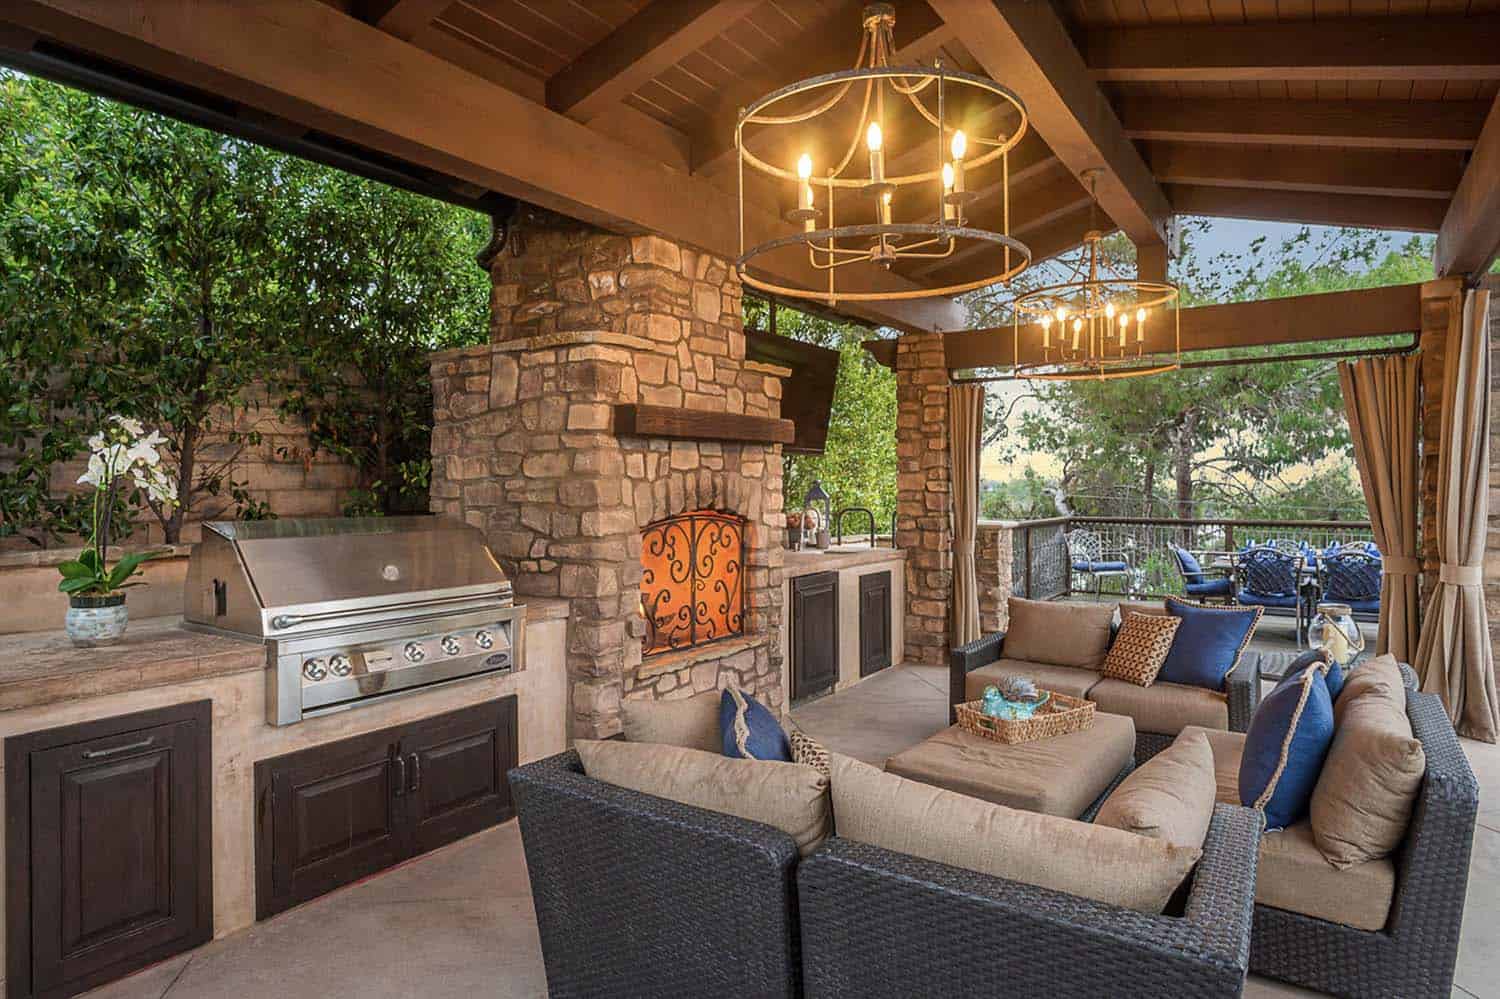 Mediterranean outdoor patio with a fireplace and furniture